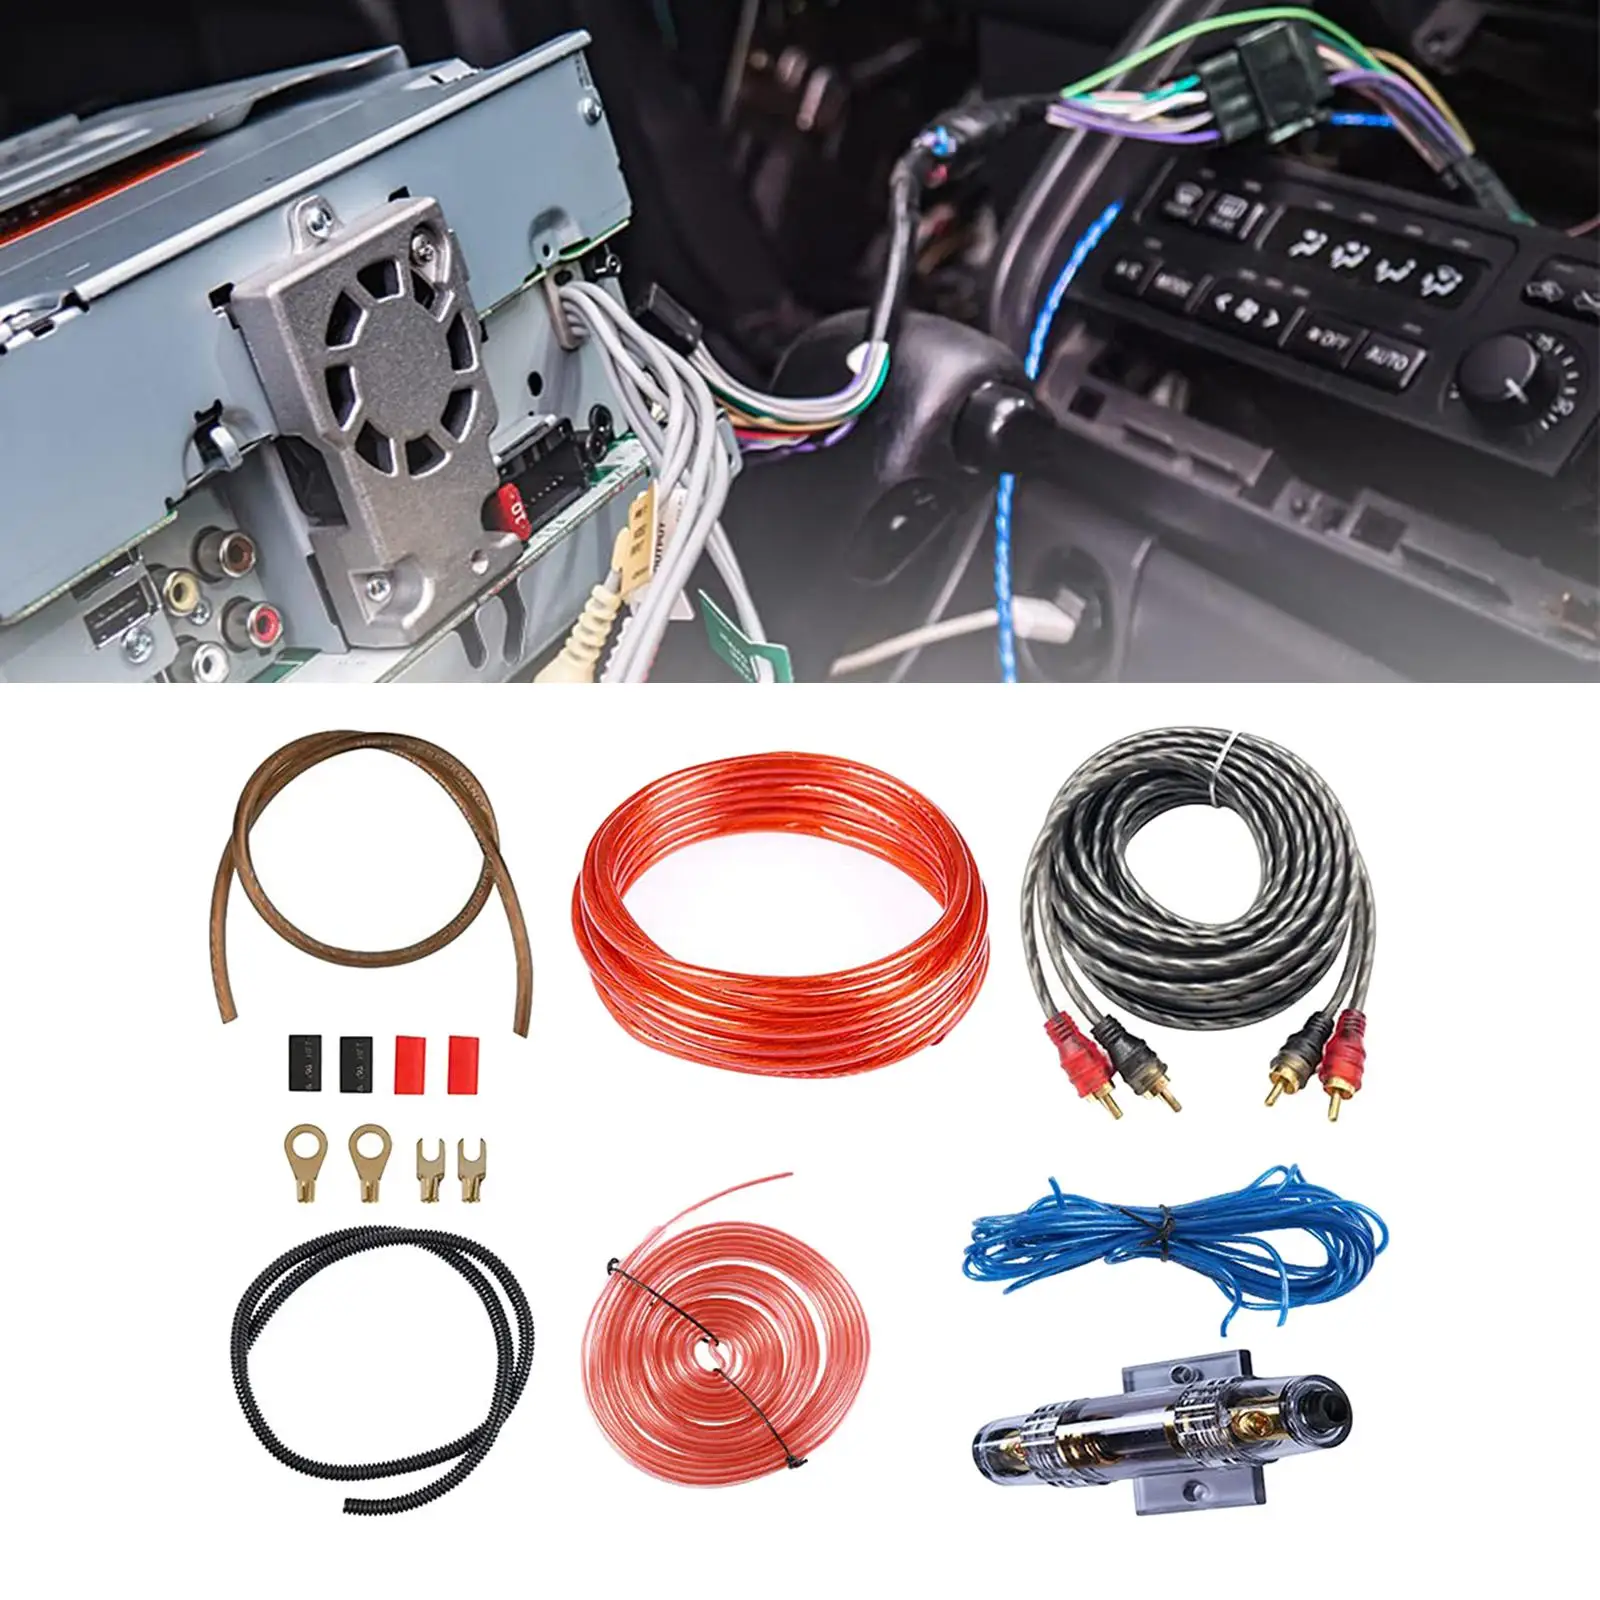 Car Audio Wiring Kit Installation Kit with Fuse Holder Speaker Cables Electrical Equipment Supplies PVC Power Wire